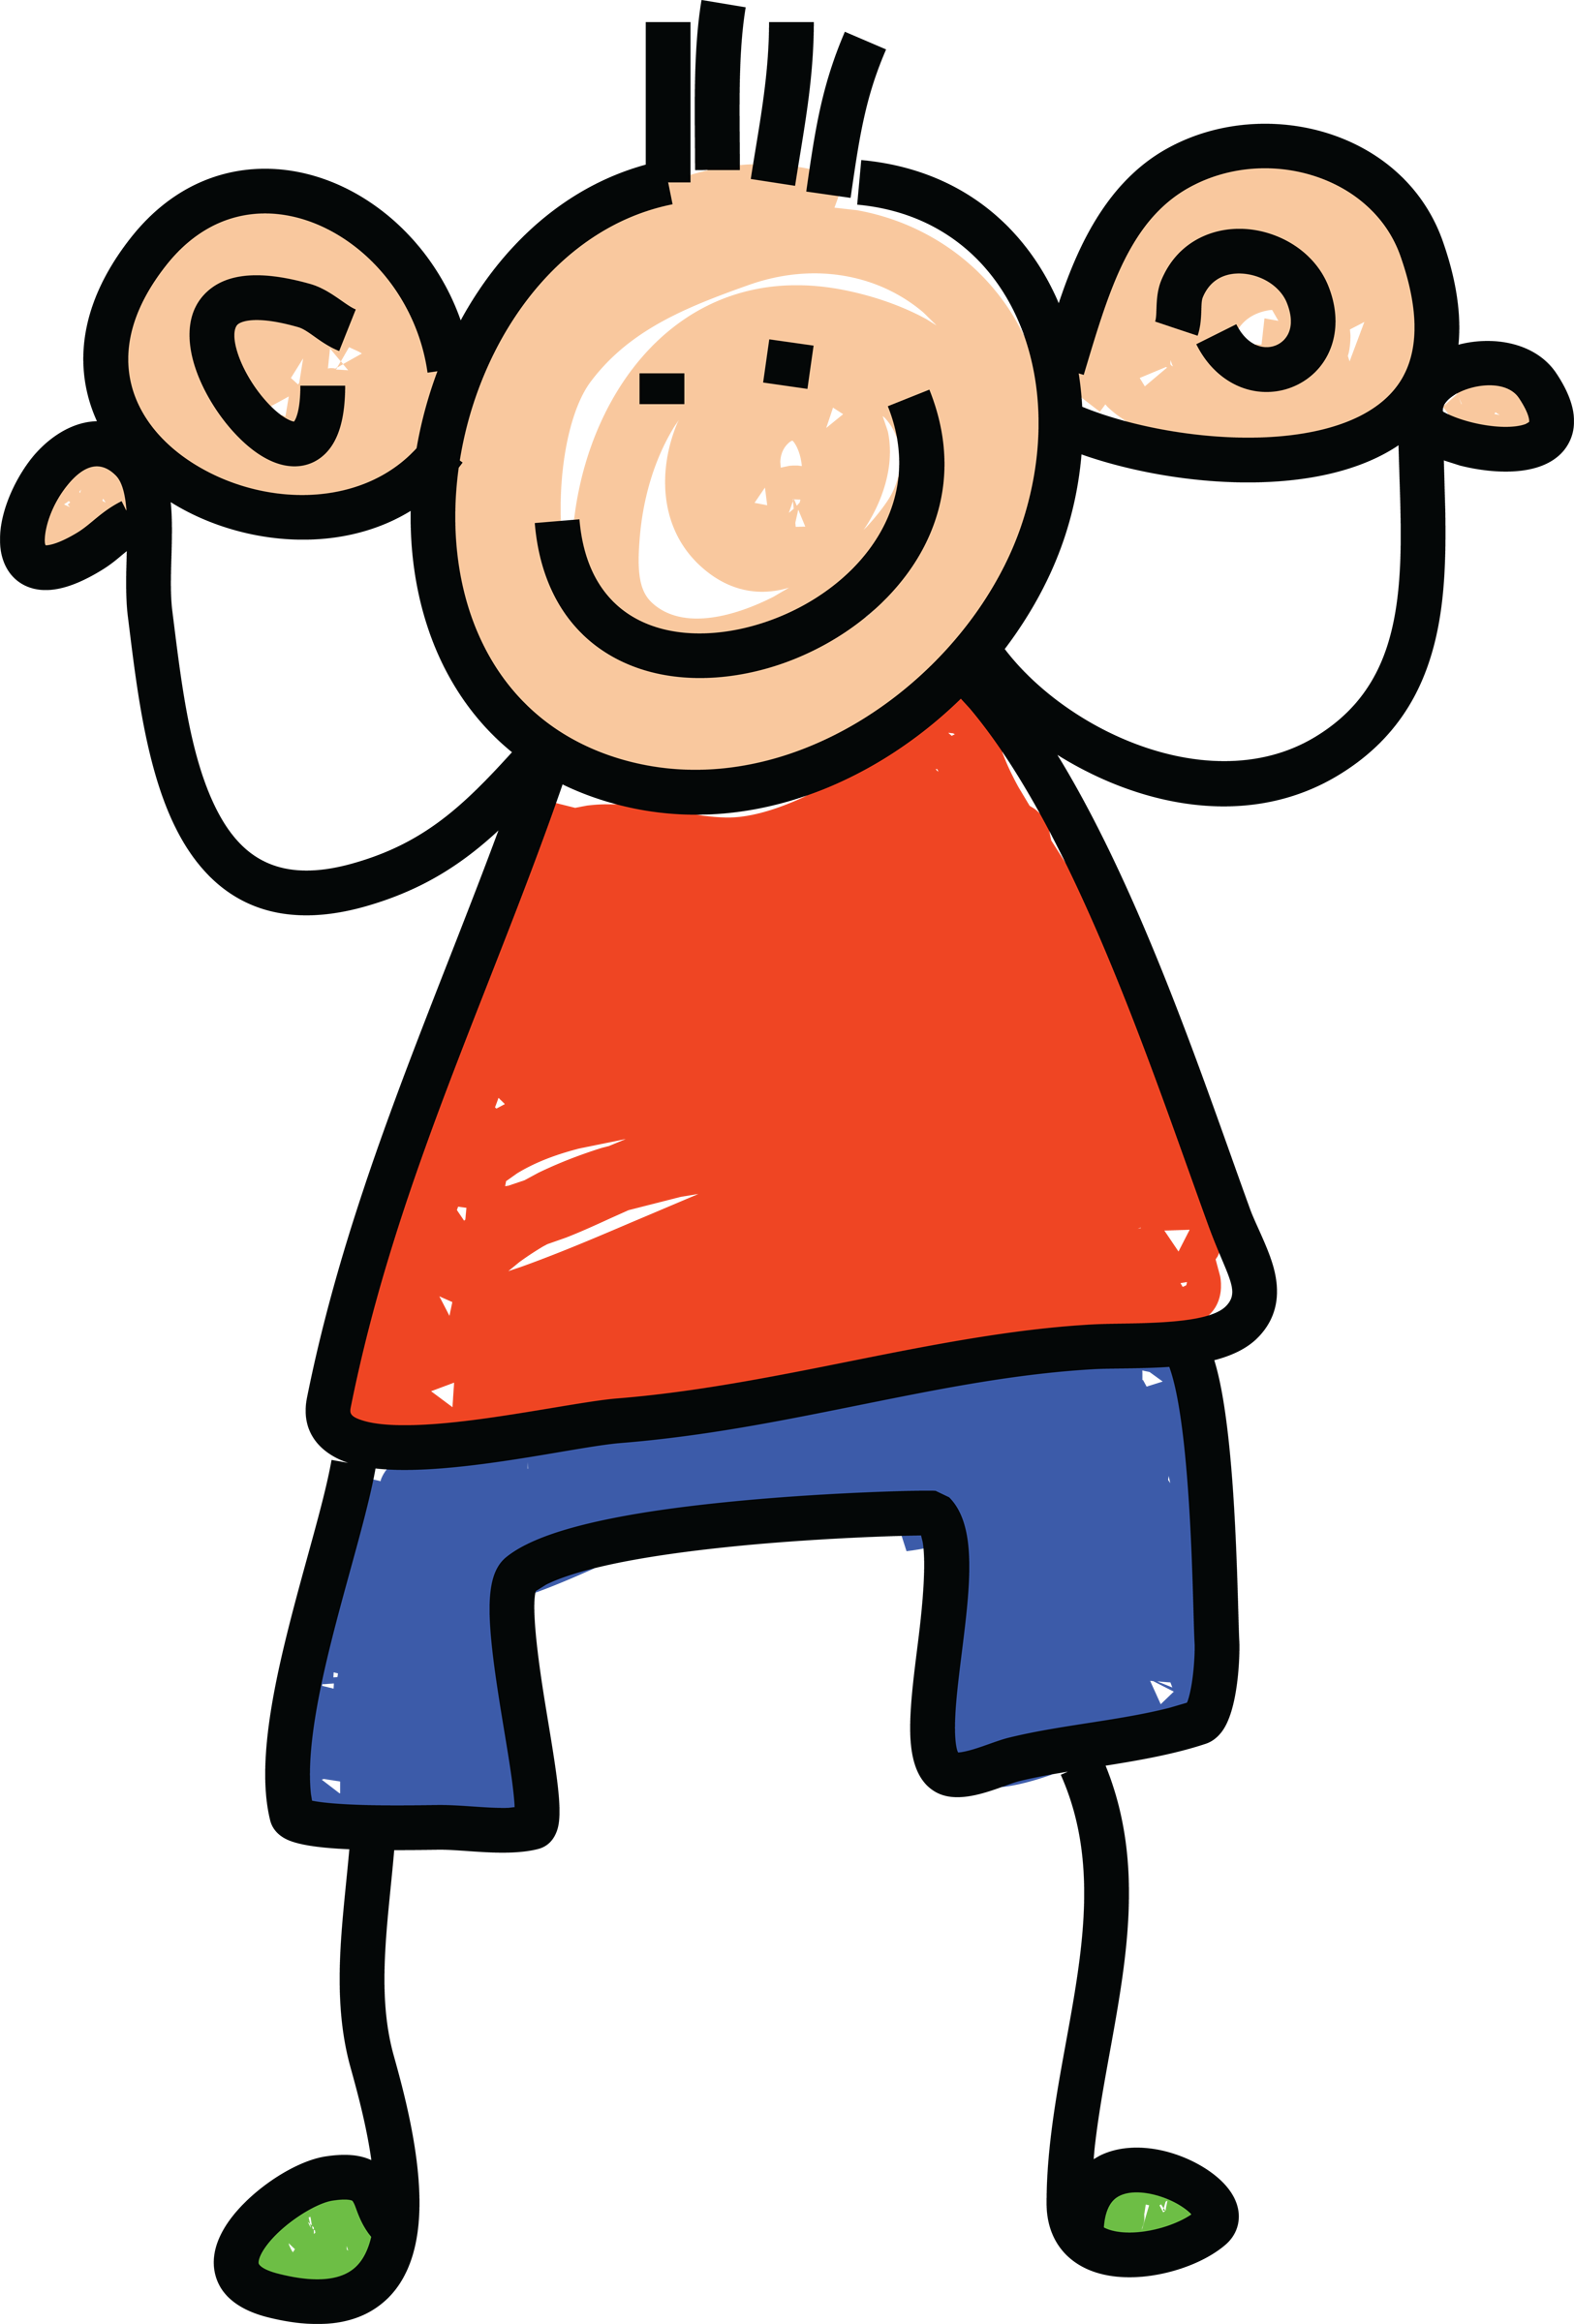 stickman style cartoon of a child listening with big ears